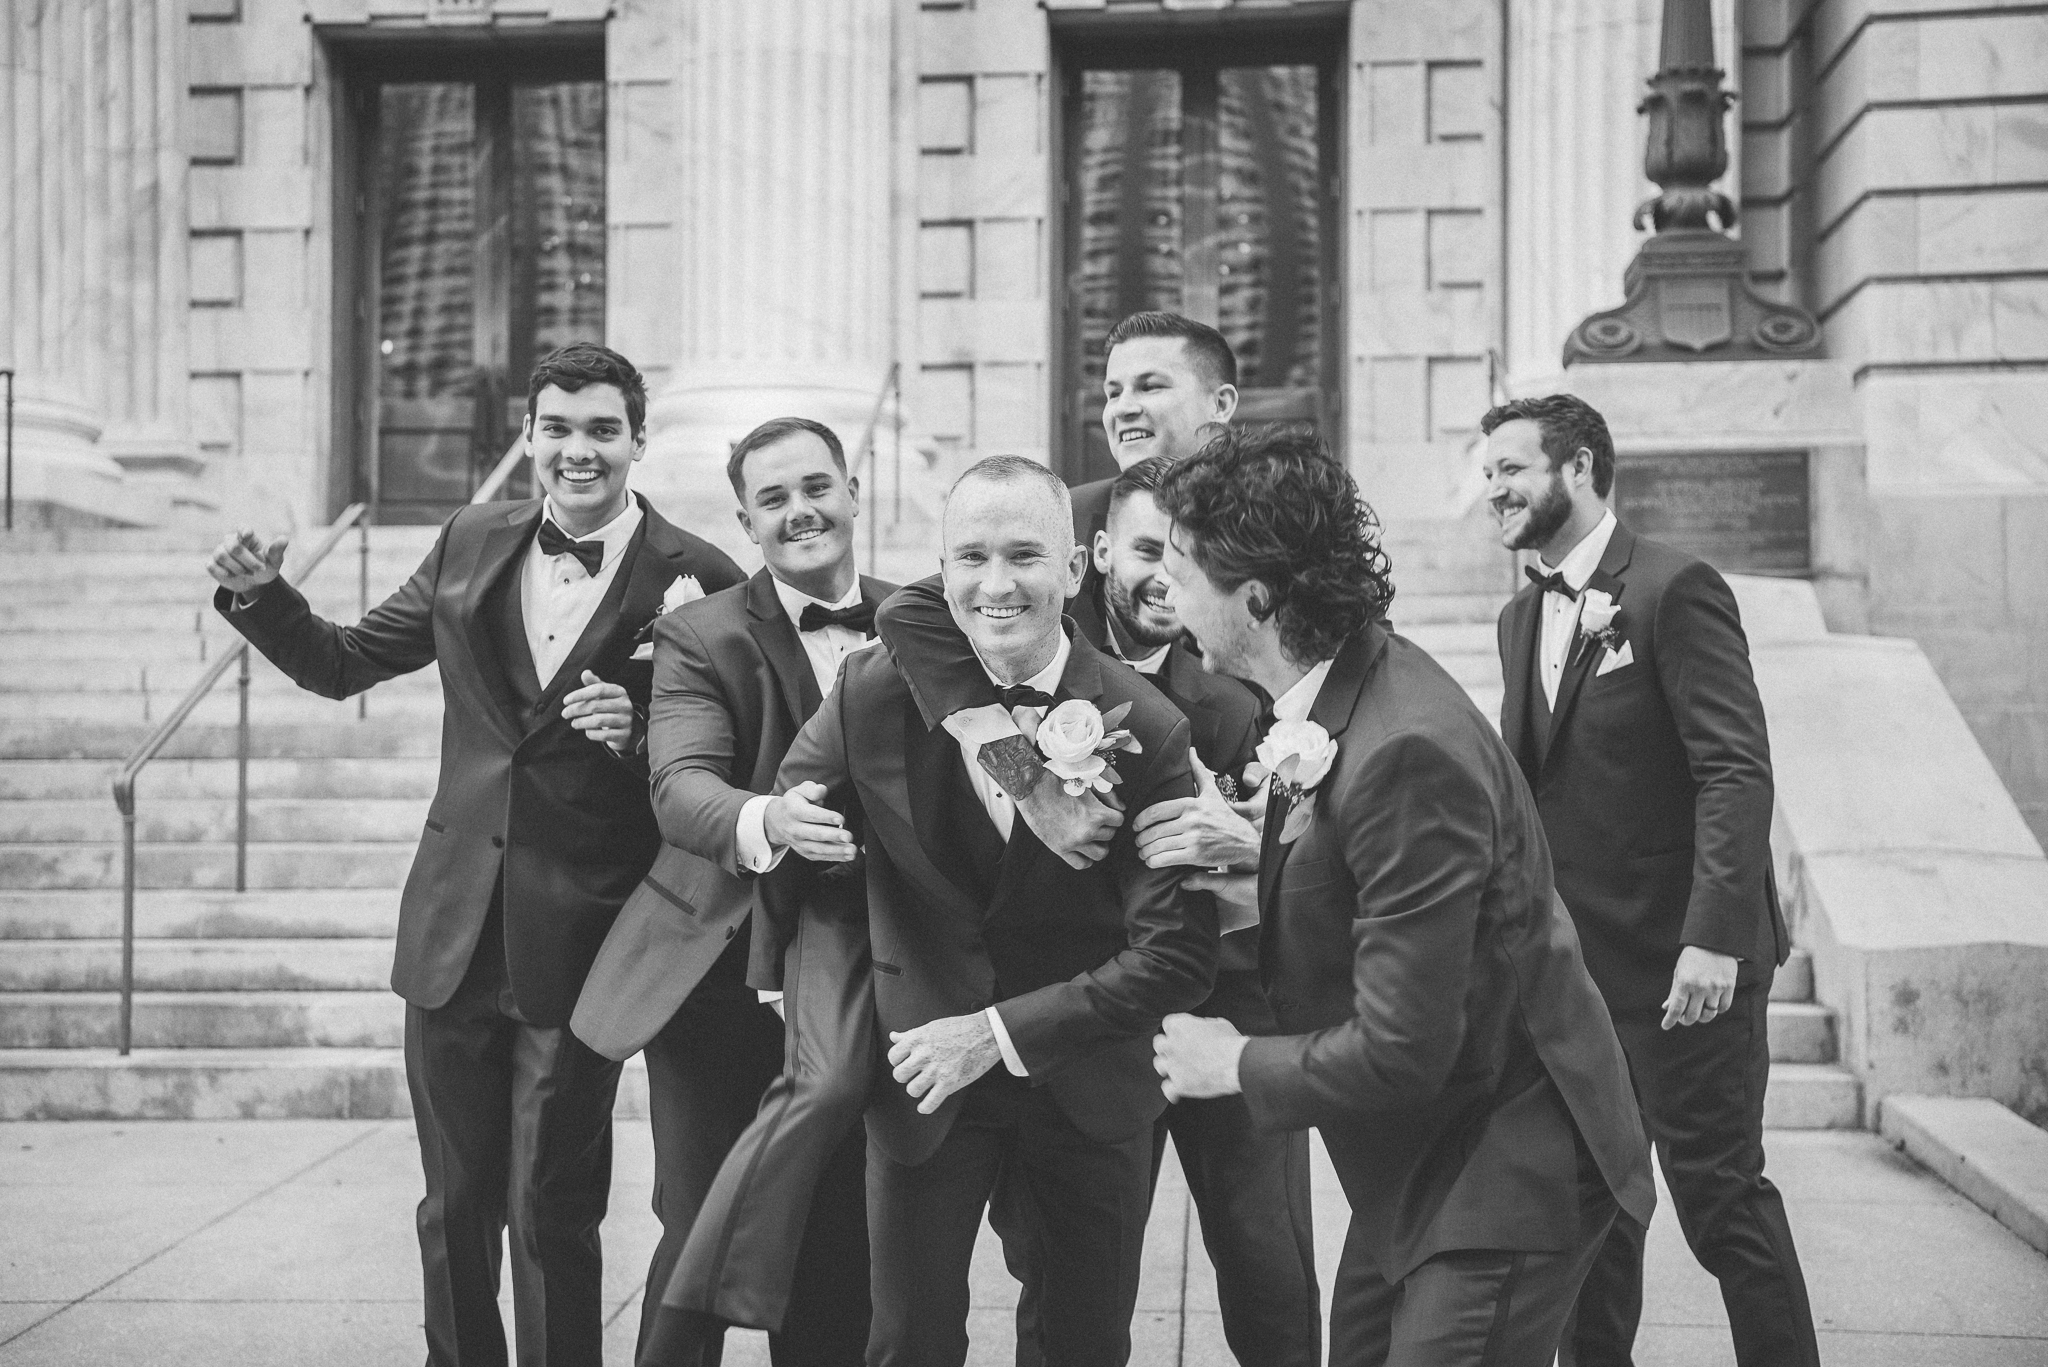 Groomsmen Photos, Le Meridien Tampa, The Courthouse, Caleo Photography